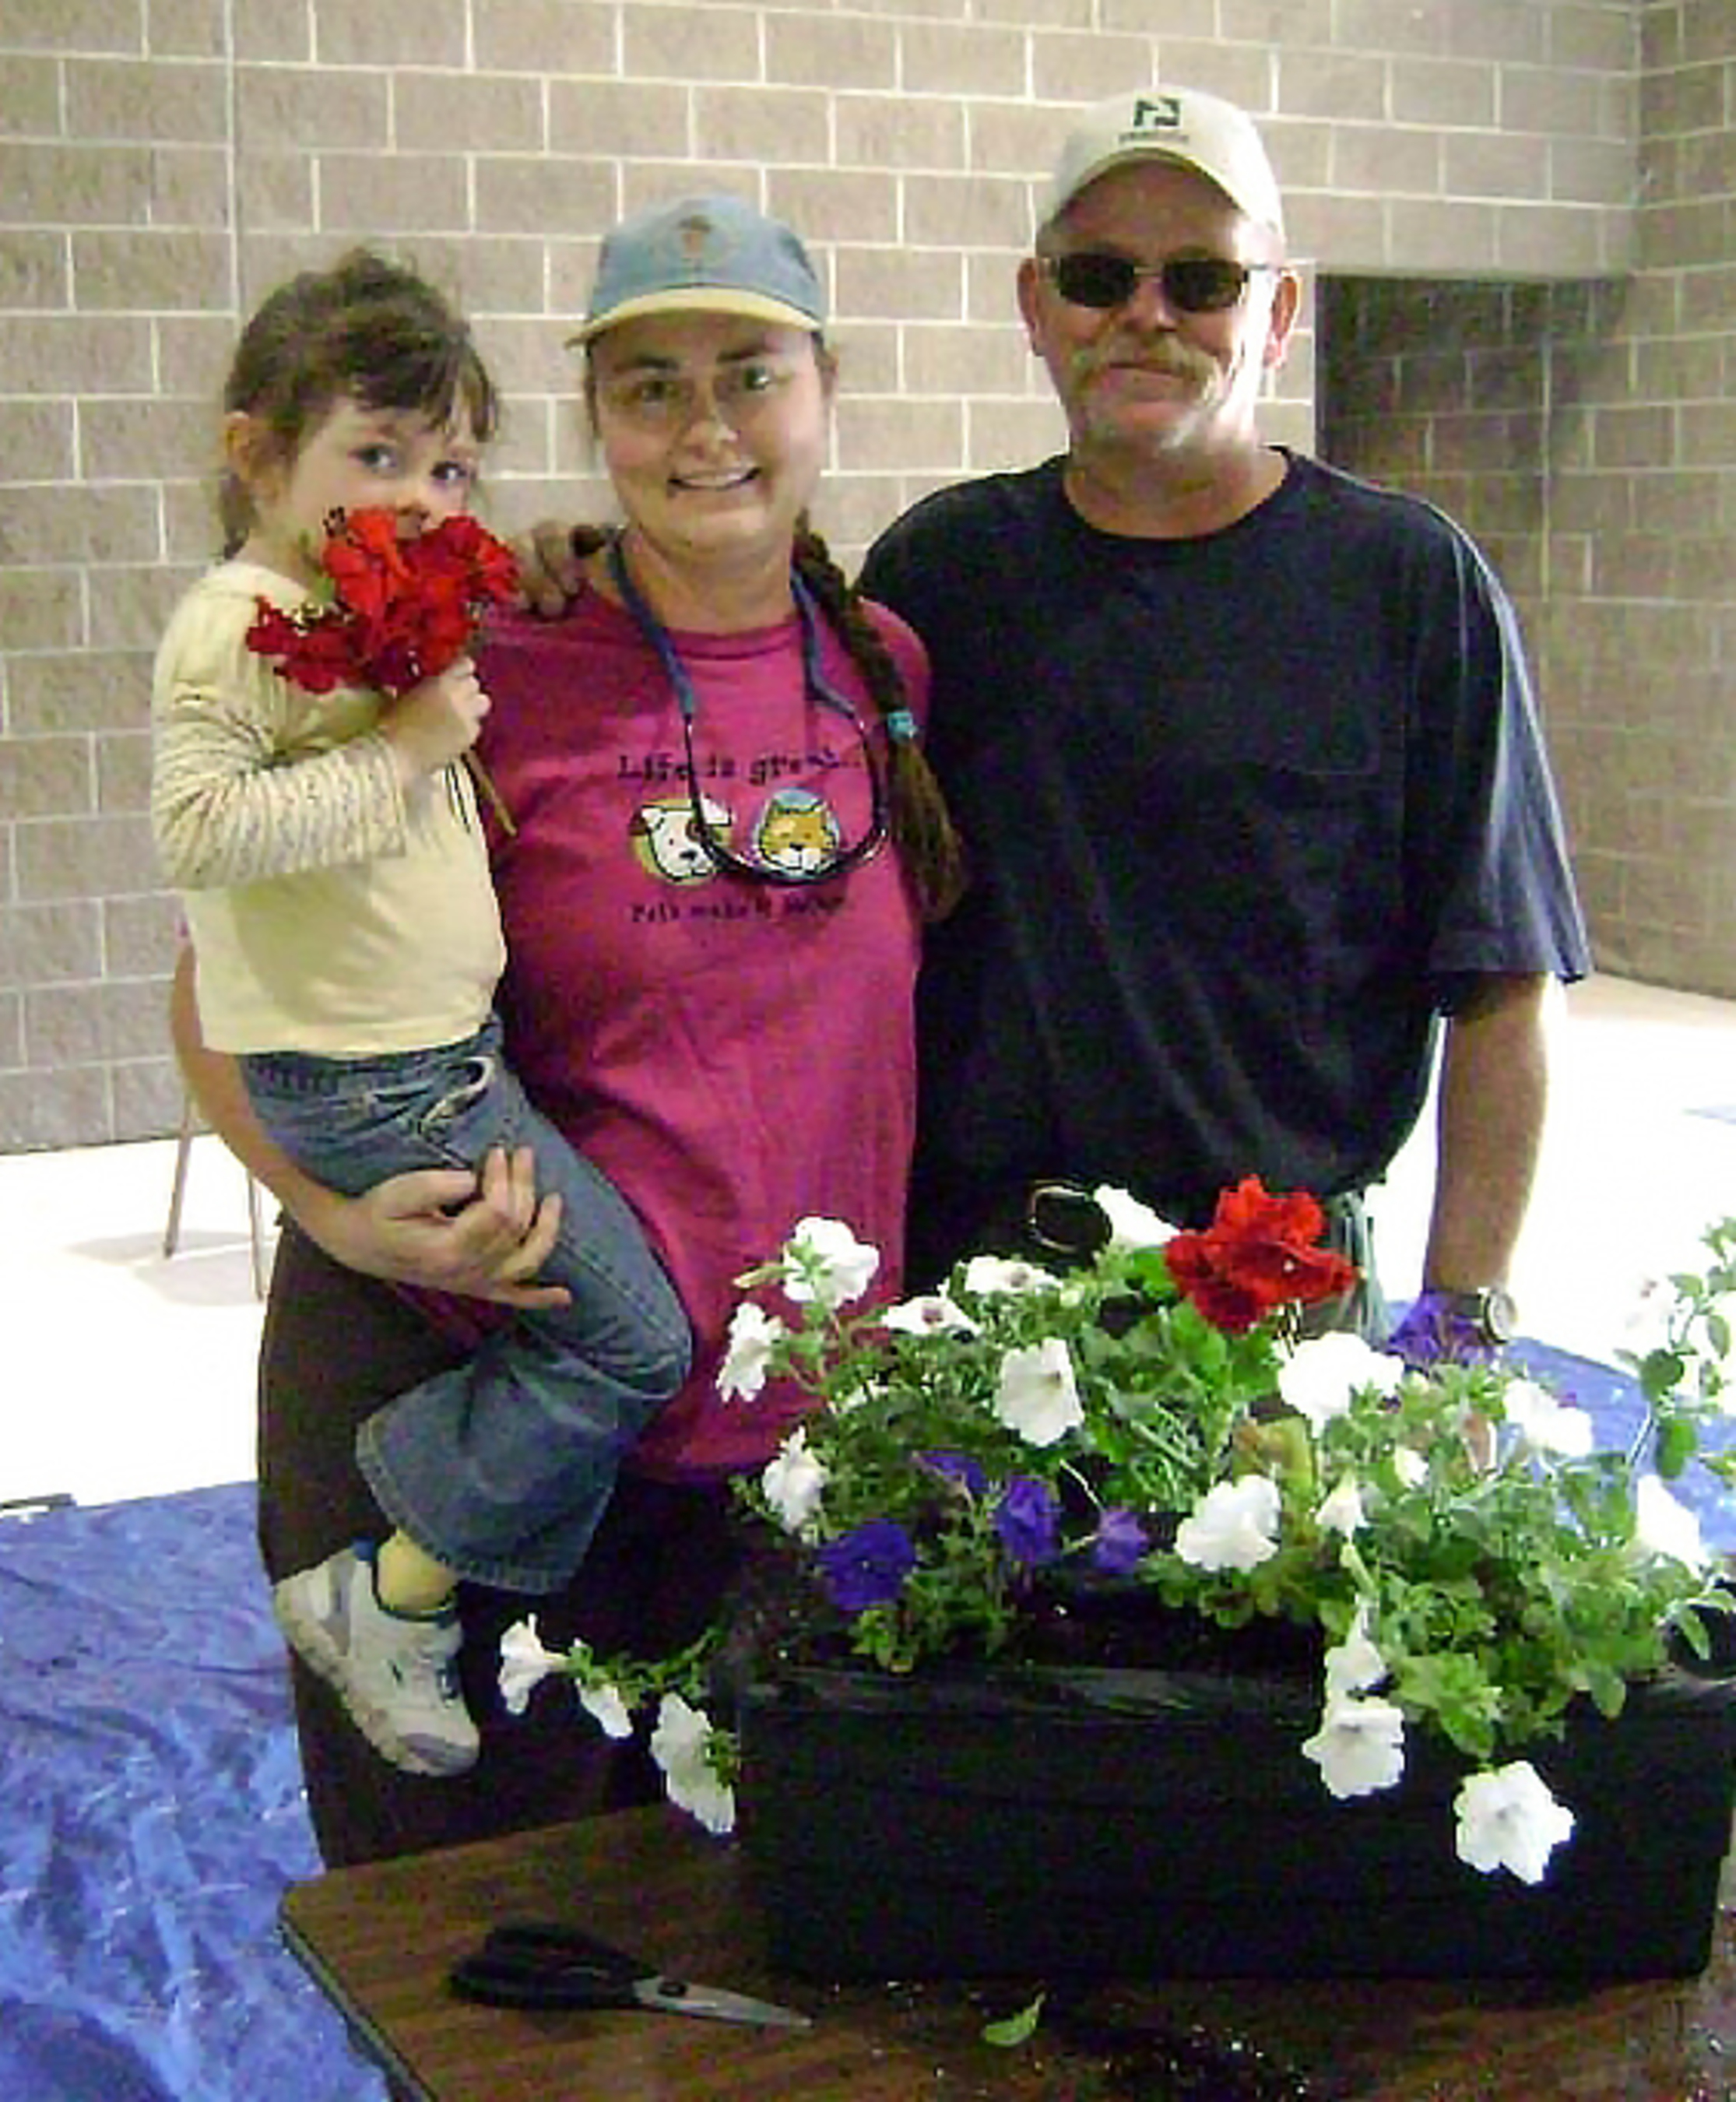 Container gardens play a central role in The Great American Cleanup, an annual initiative launched by Keep America Beautiful. This family was one of many in Hot Springs, SD who received an EarthBox container garden to plant. Thanks to a grant from Lowes Charitable and Educational Foundation, the Hot Springs Keep America Beautiful organization started an EarthBox Giveaway program. Needy families and businesses wanting to beautify the commercial district received EarthBox containers and plants to grow in them. (PRNewsFoto/EarthBox)